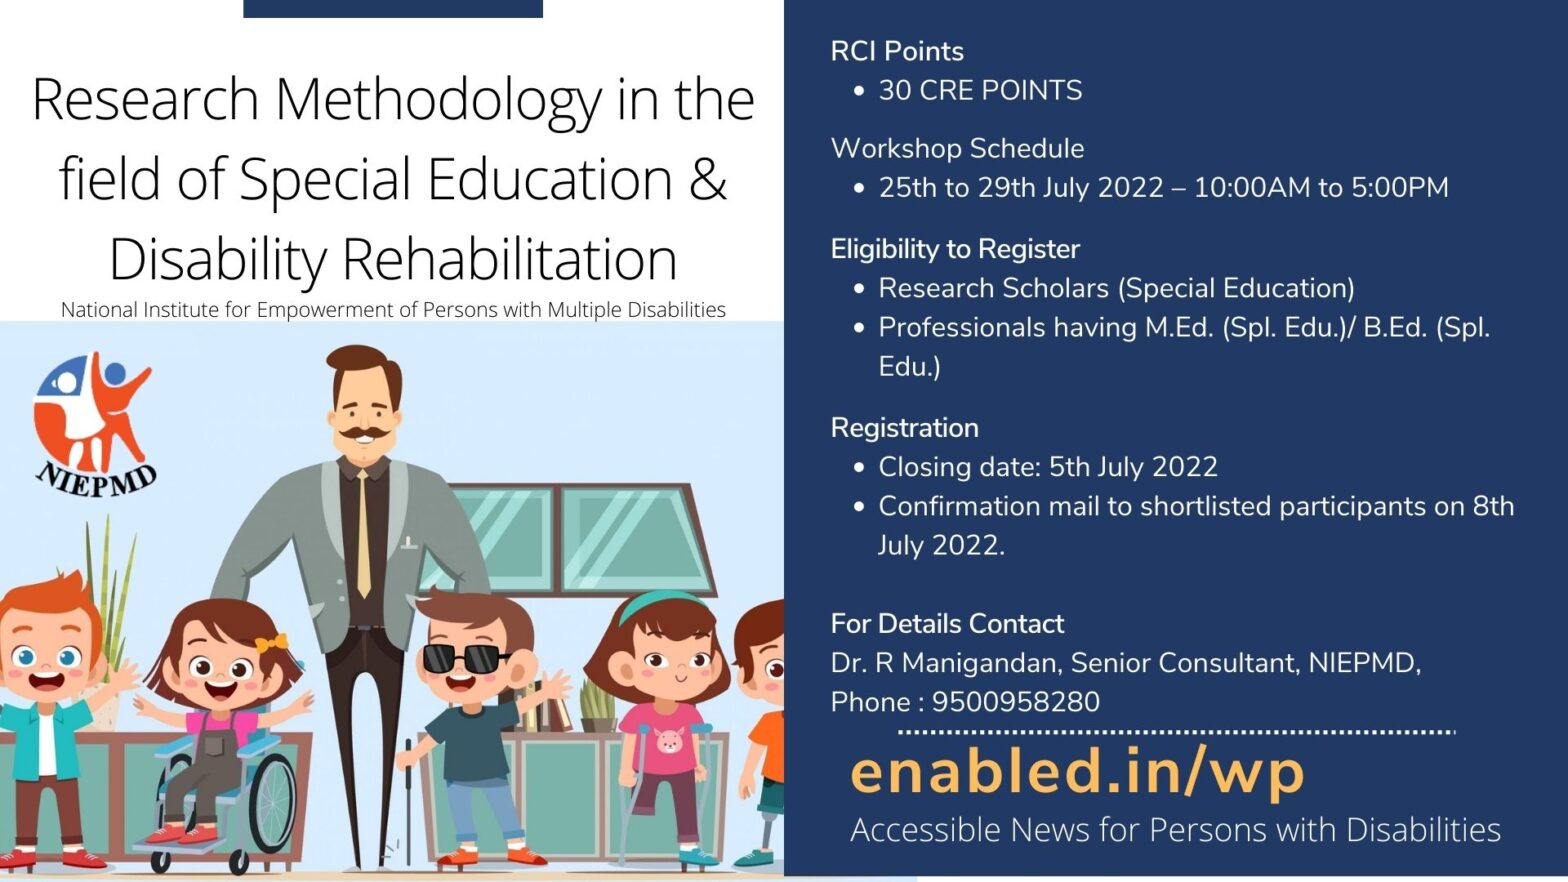 Research Methodology in the field of Special Education & Disability Rehabilitation-NIEPMD